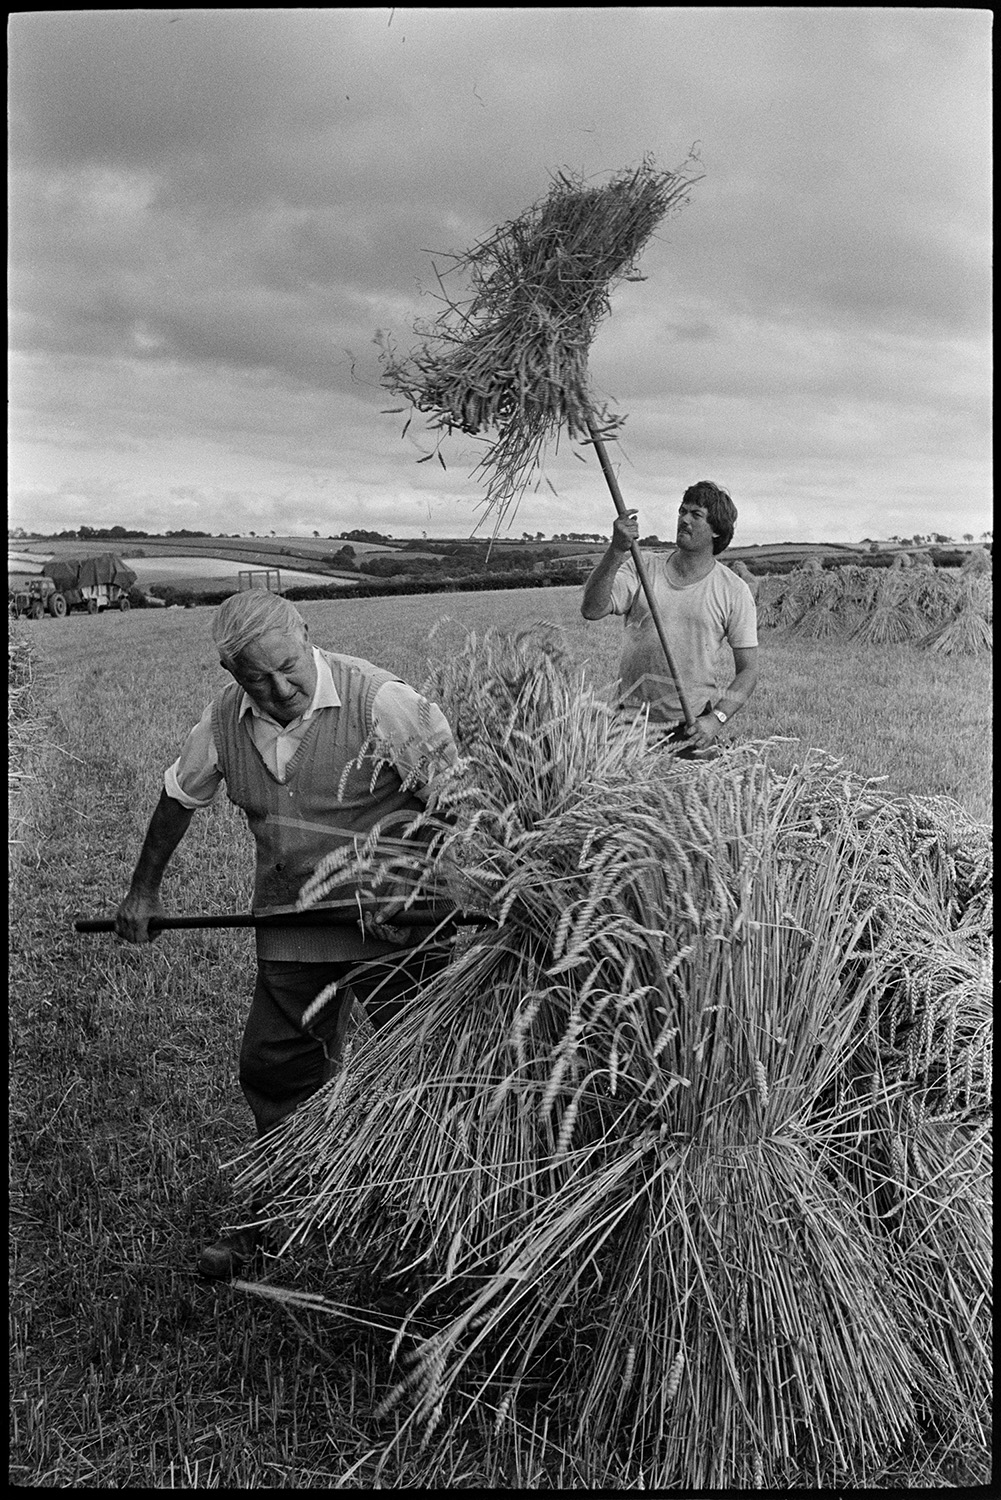 Farmers loading nitches of wheat onto trailer to be taken to reed comber. 
[Men, possibly from the Down family, carrying bundles of wheat on pitchforks to load onto a trailer in a field at Spittle, Chulmleigh.]